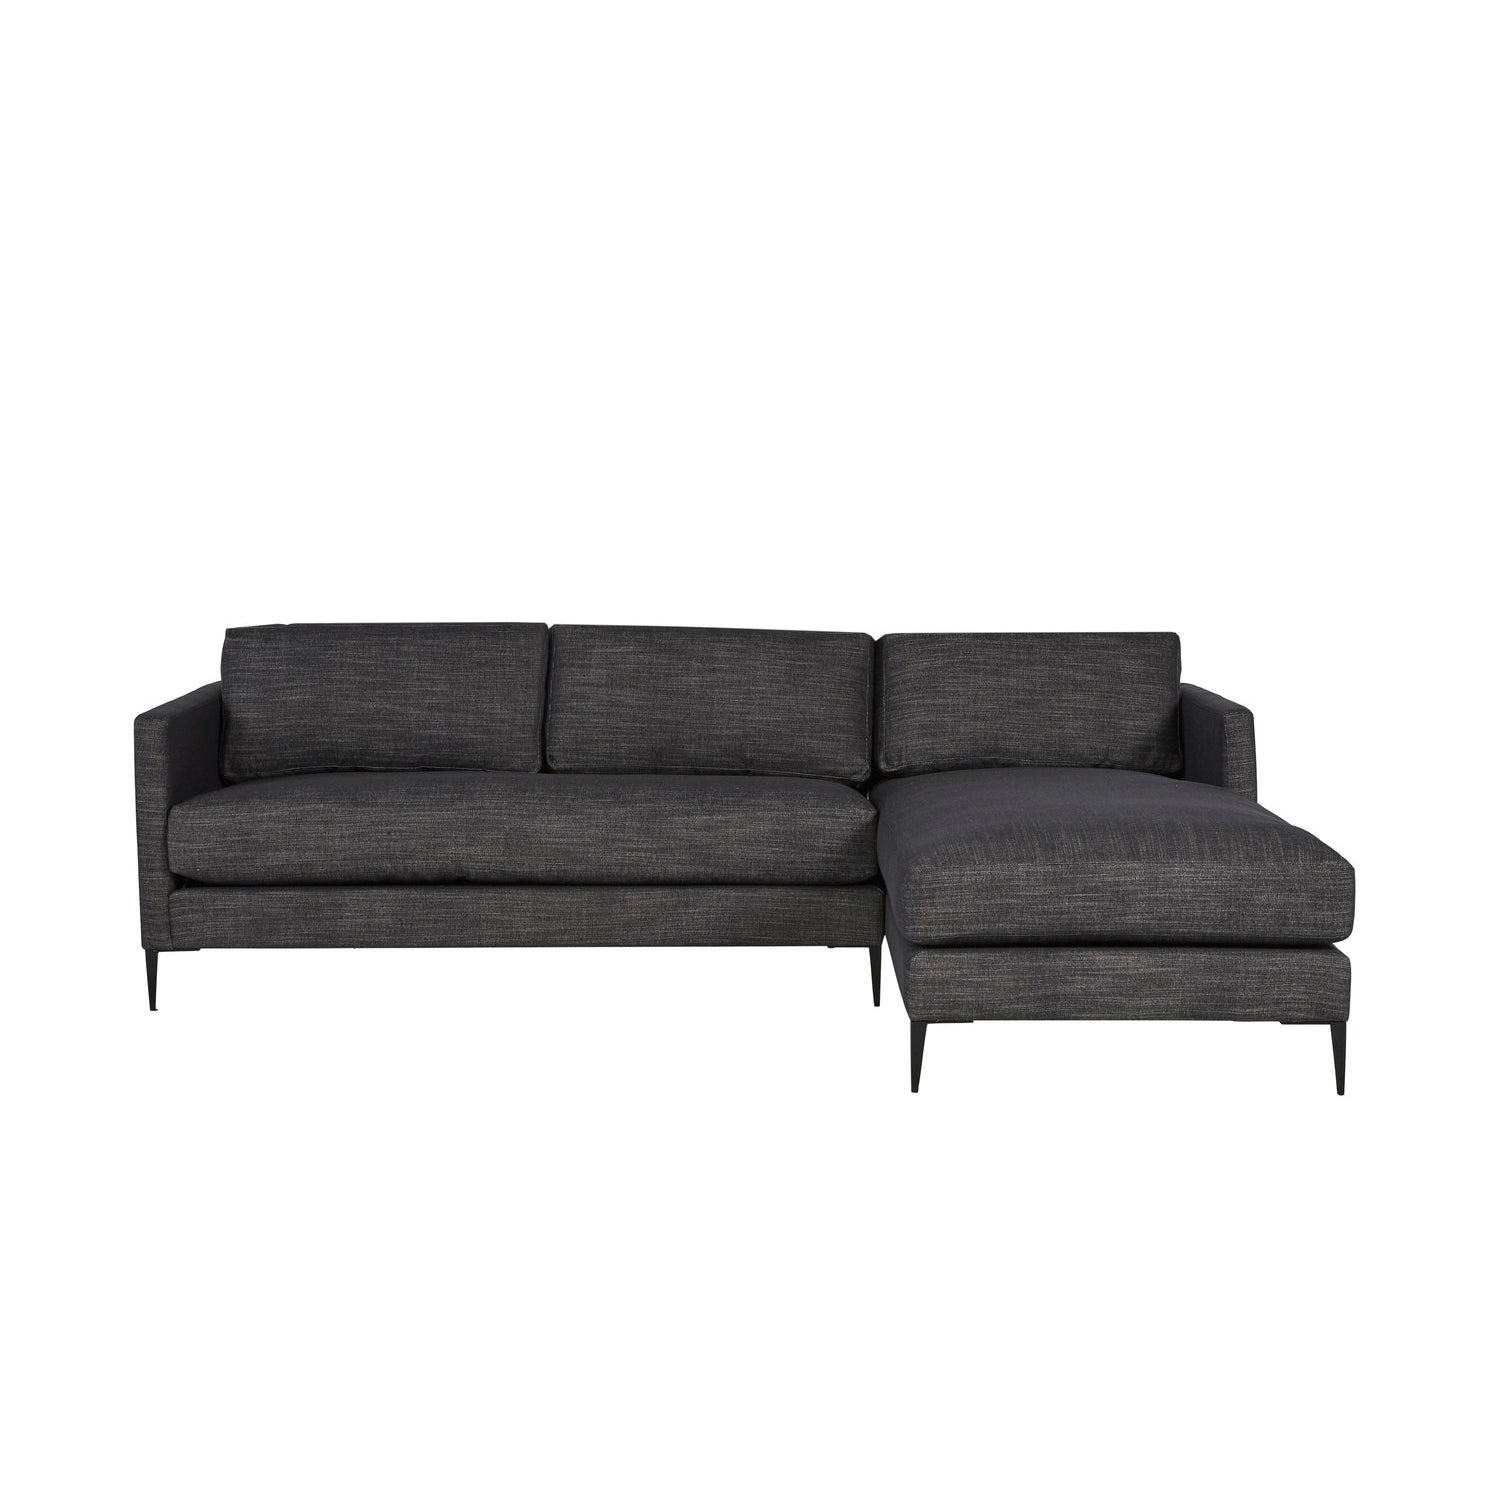 BENEDICT 2PC SECTIONAL